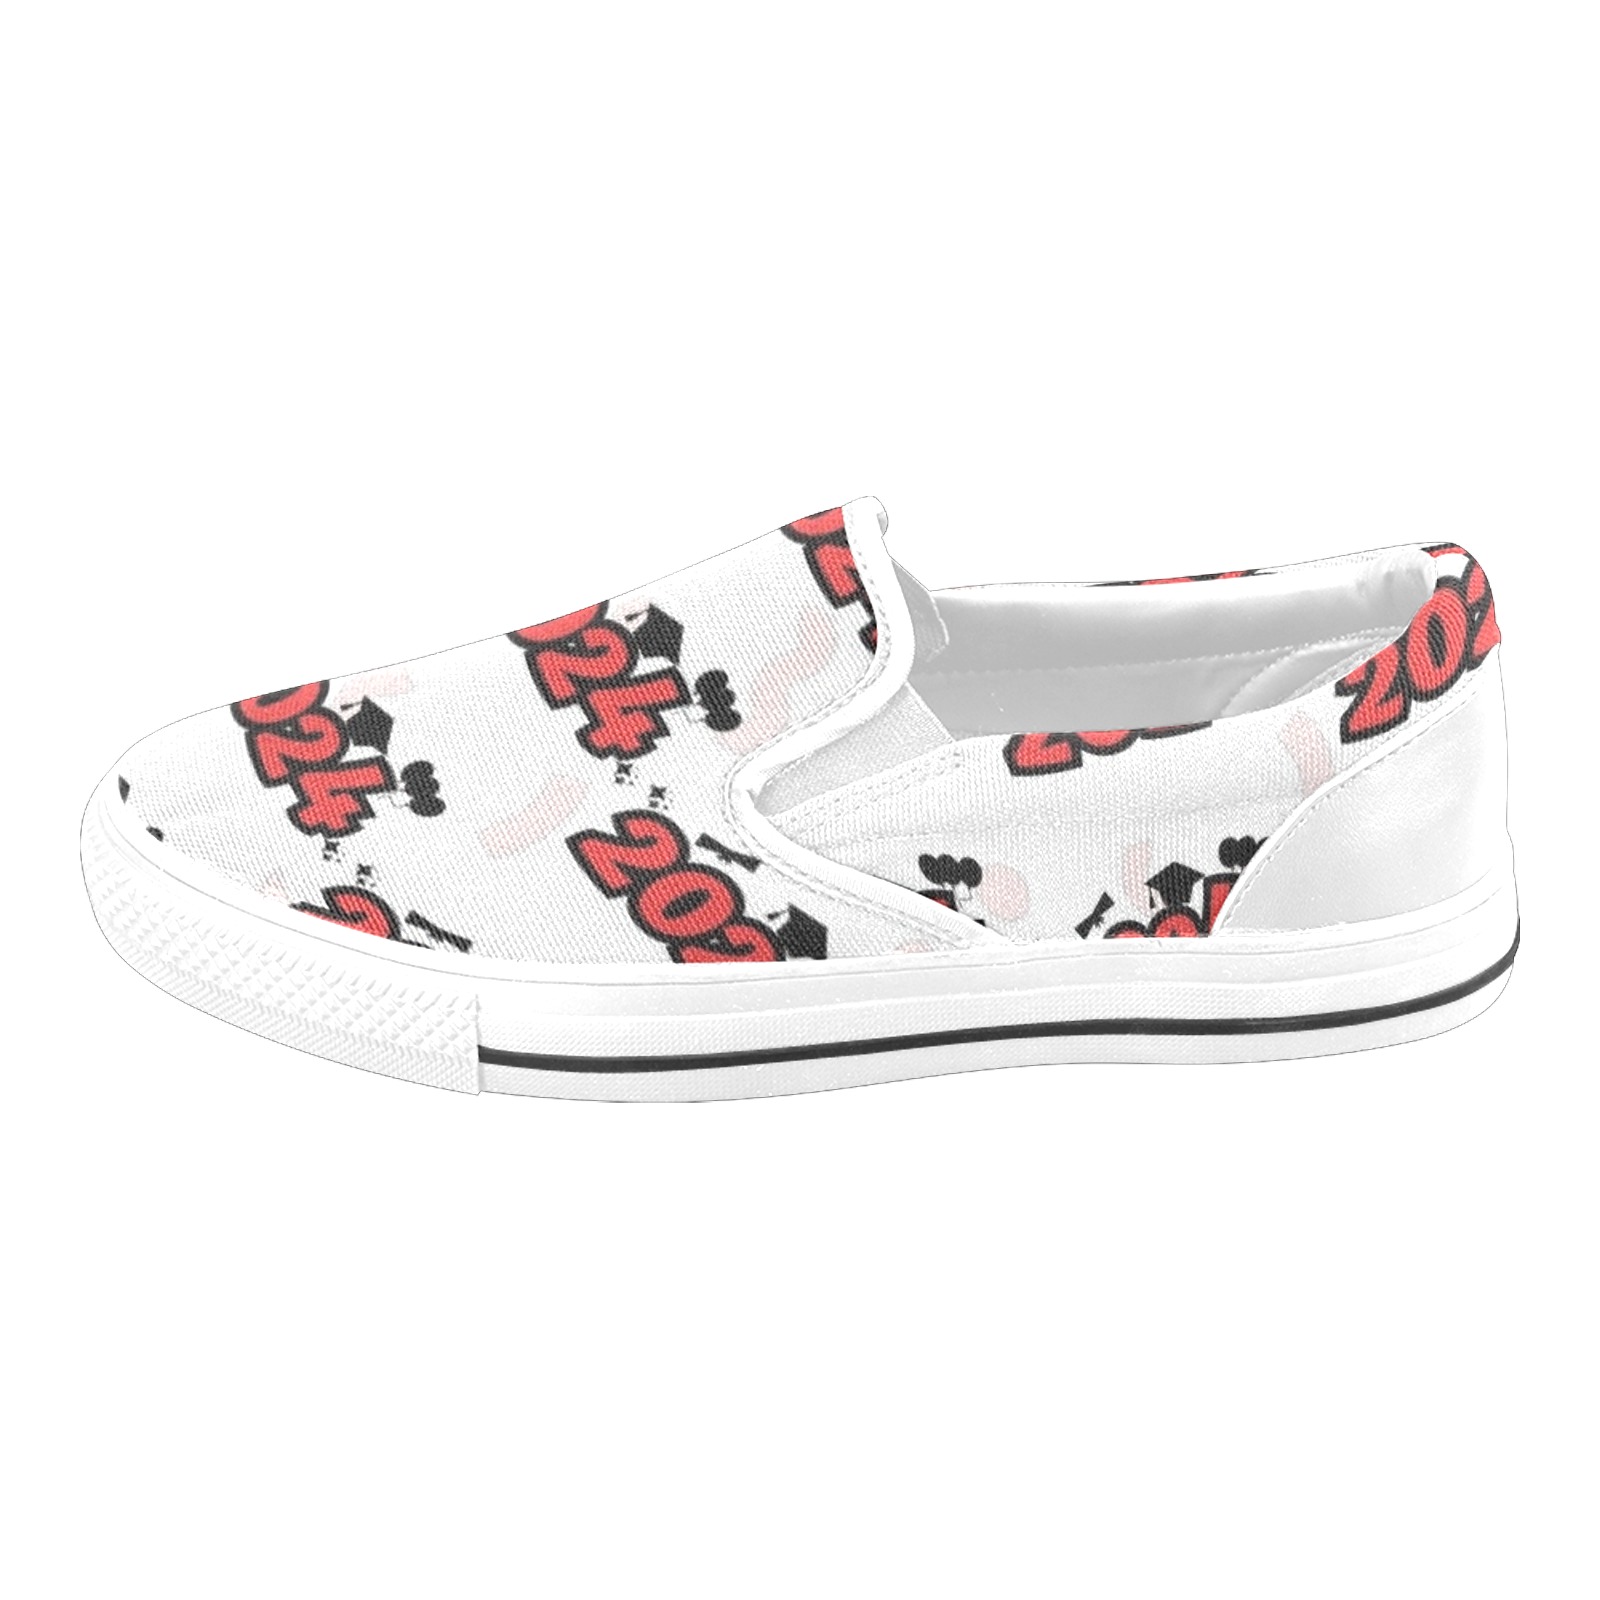 Mens Slip On Shoes Red and Black Graduation 2024=3 Women's Fashion Art ...